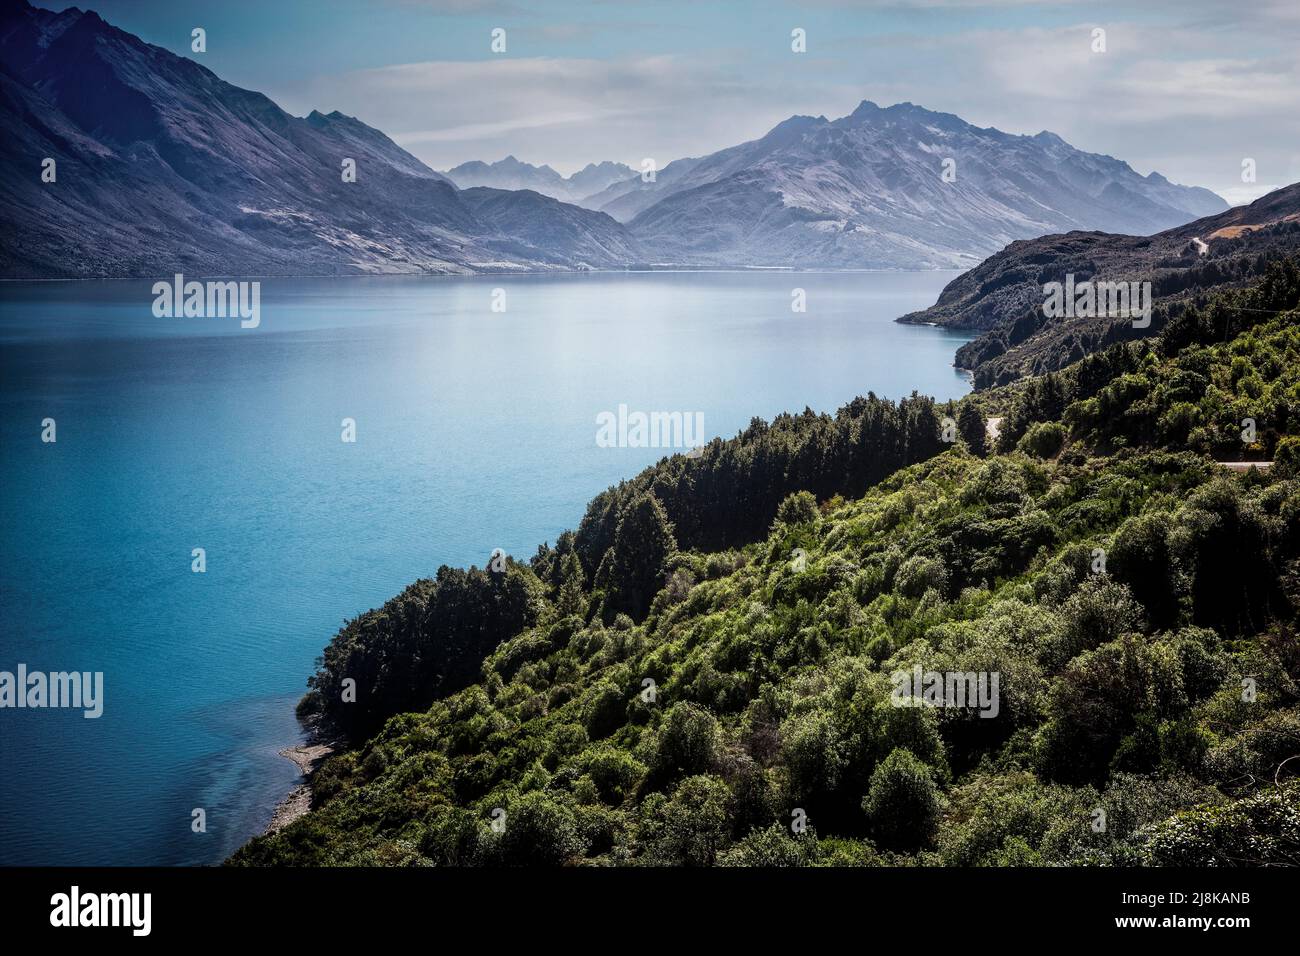 Lake Wakatipu is in regular view along the road to Glenorchy, South Island, New Zealand. Stock Photo